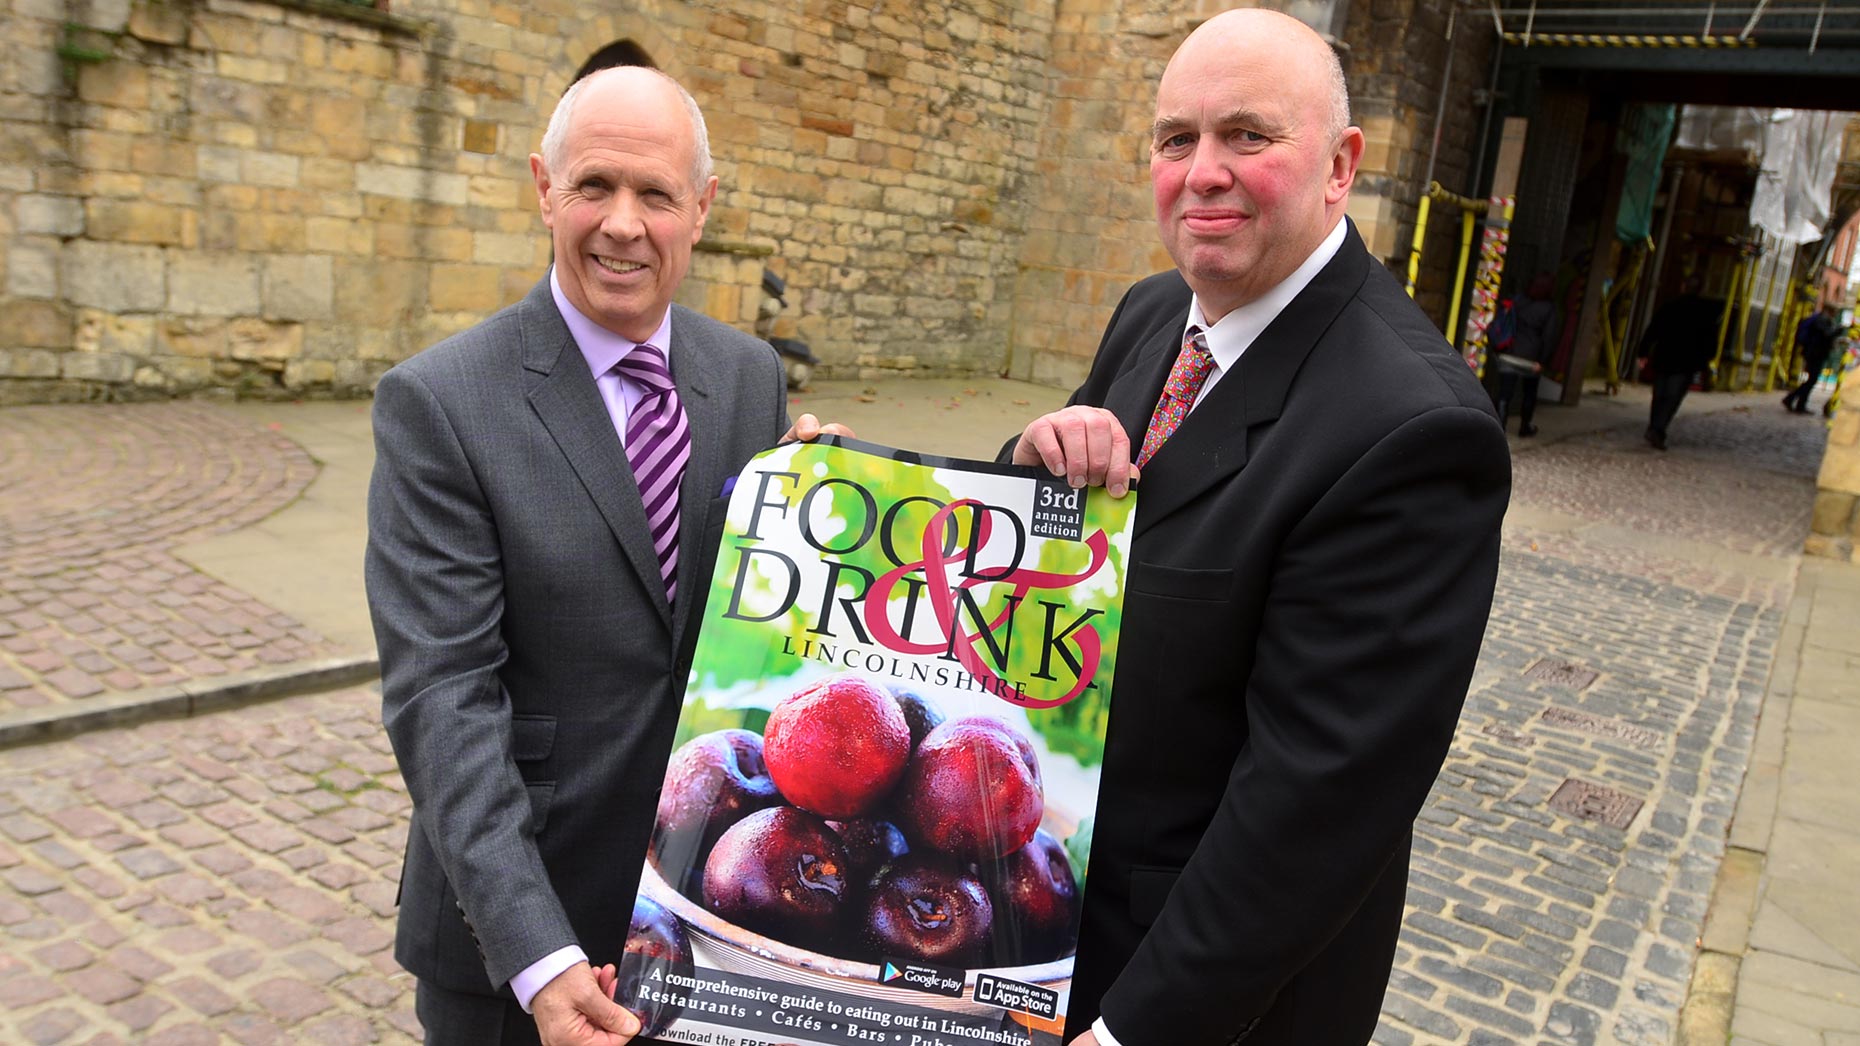 Robin Fry and Councillor Colin Davie revealing the new guide. Photo: Steve Smailes for The Lincolnite